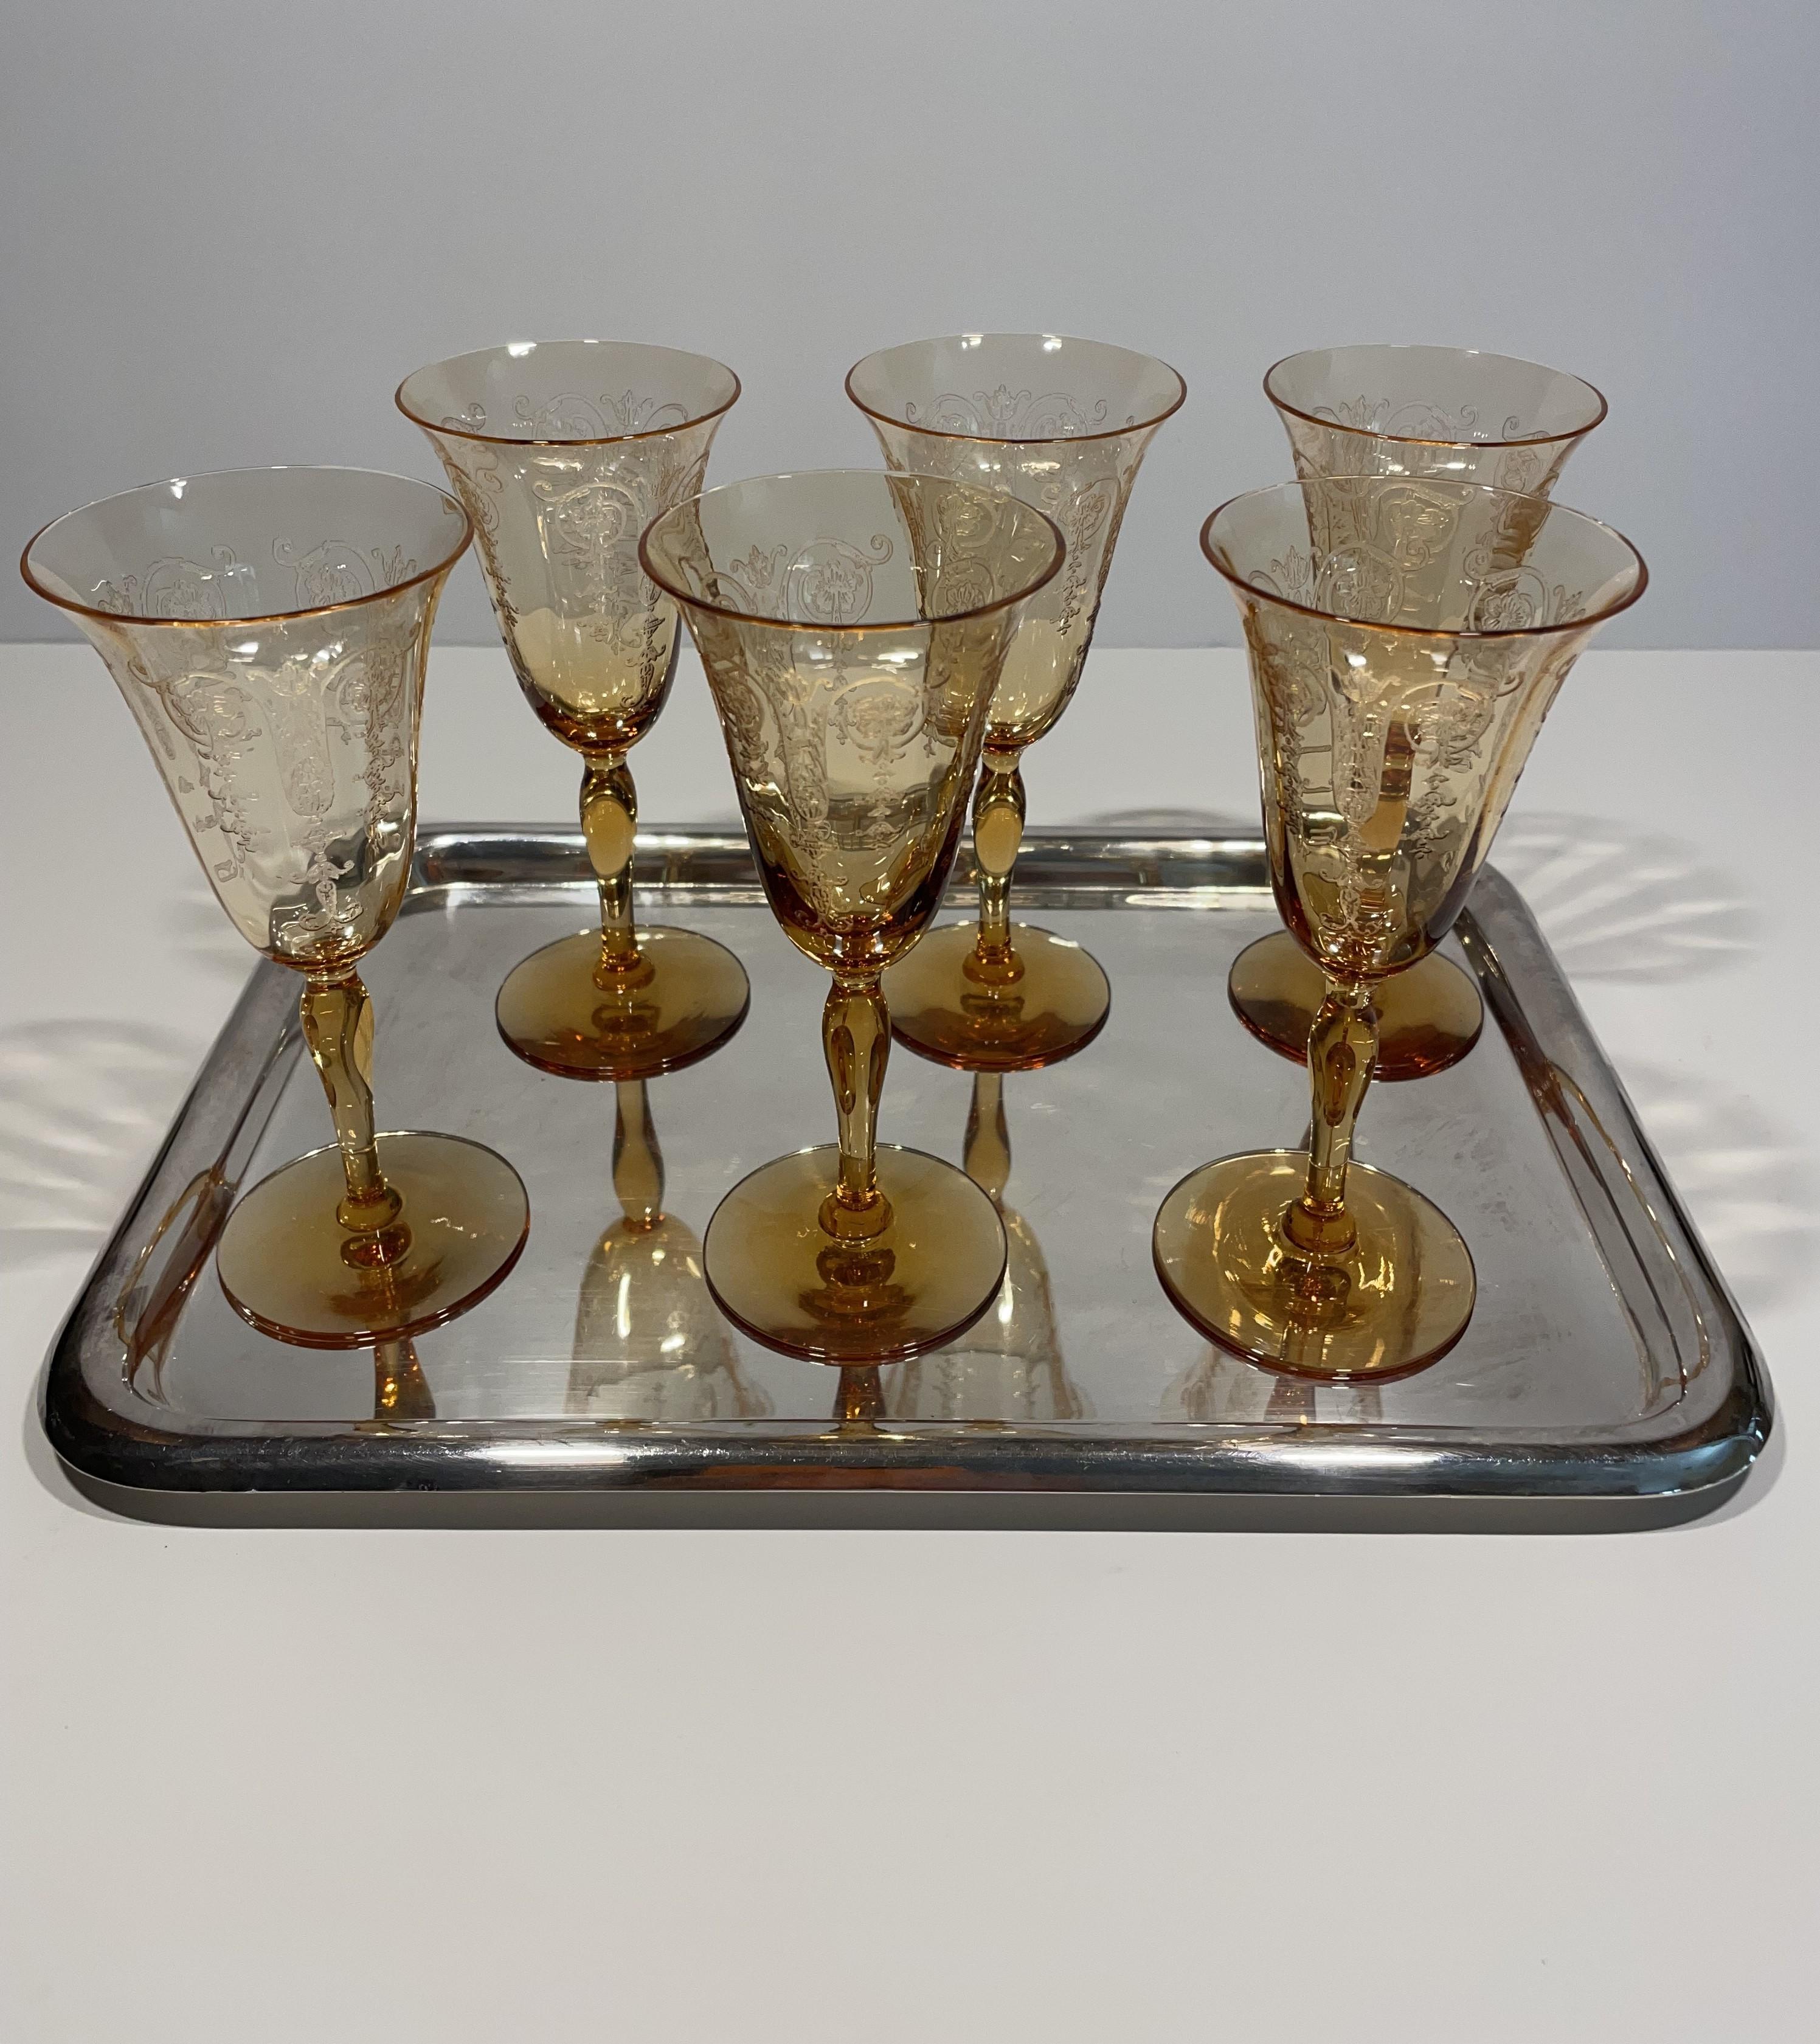 1930s Set of 6 Amber Crystal Aperitif Glasses with Silver-Plate Drinks Tray In Excellent Condition For Sale In Austin, TX